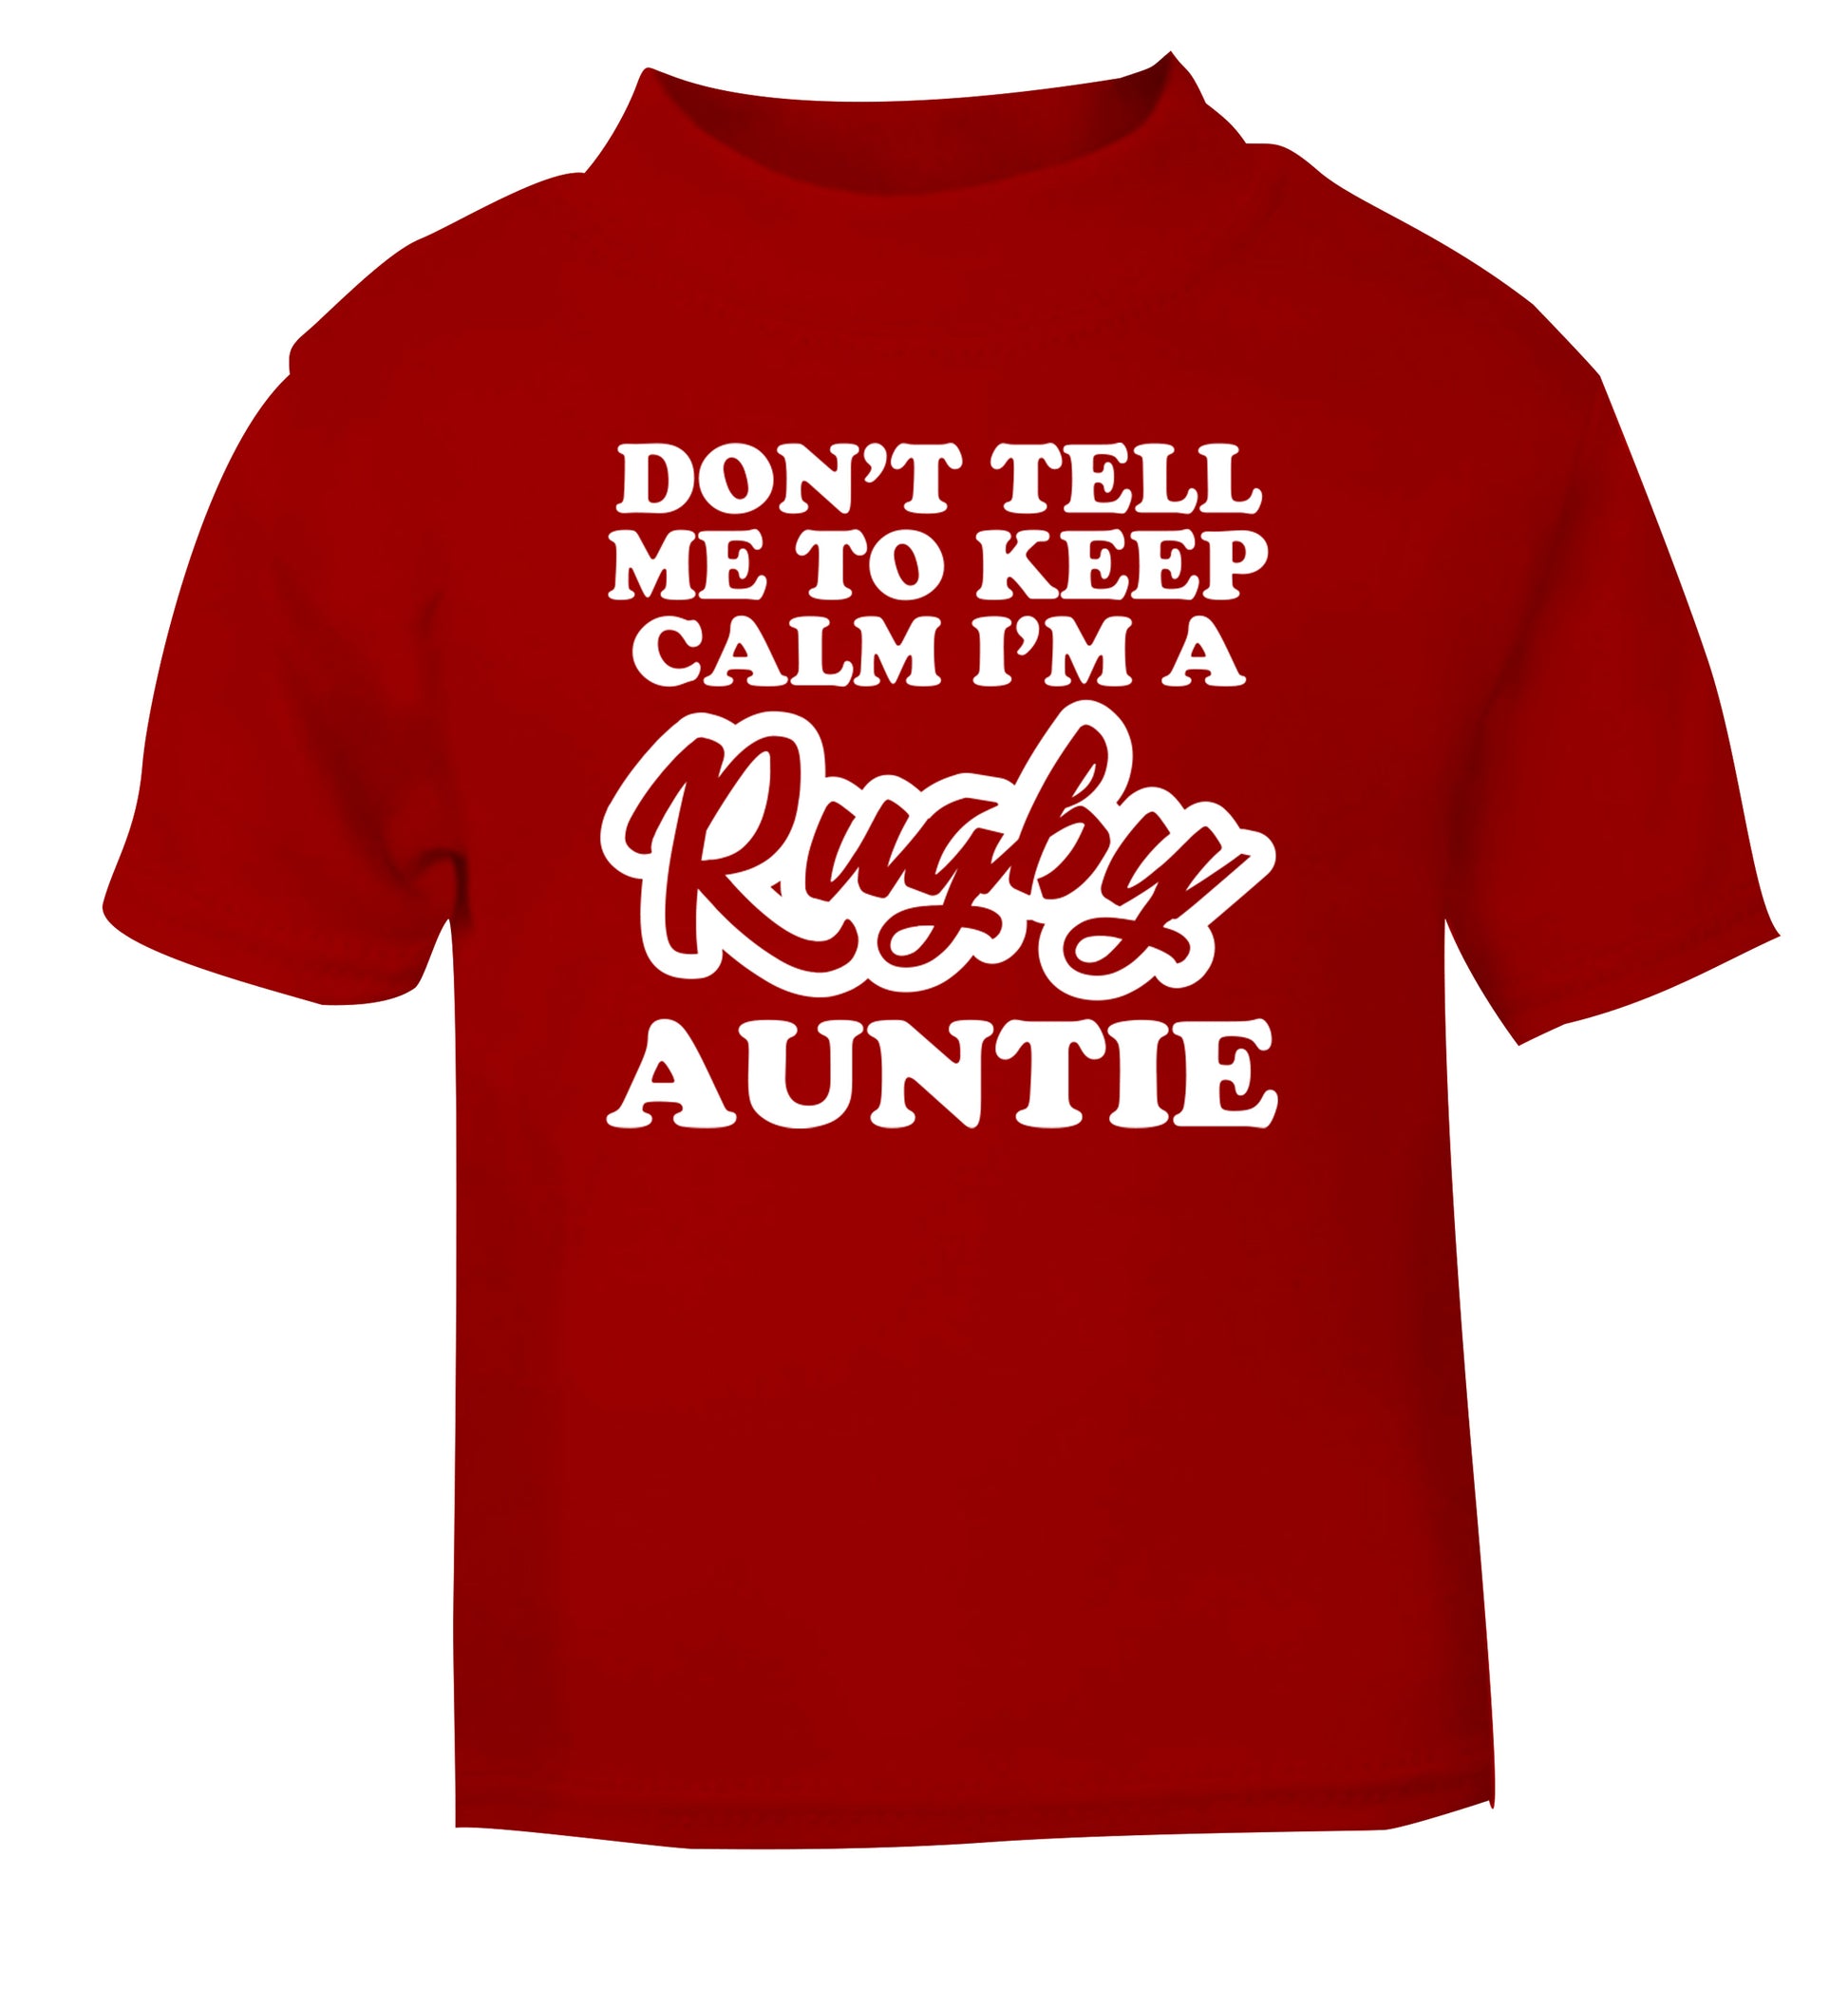 Don't tell me keep calm I'm a rugby auntie red Baby Toddler Tshirt 2 Years